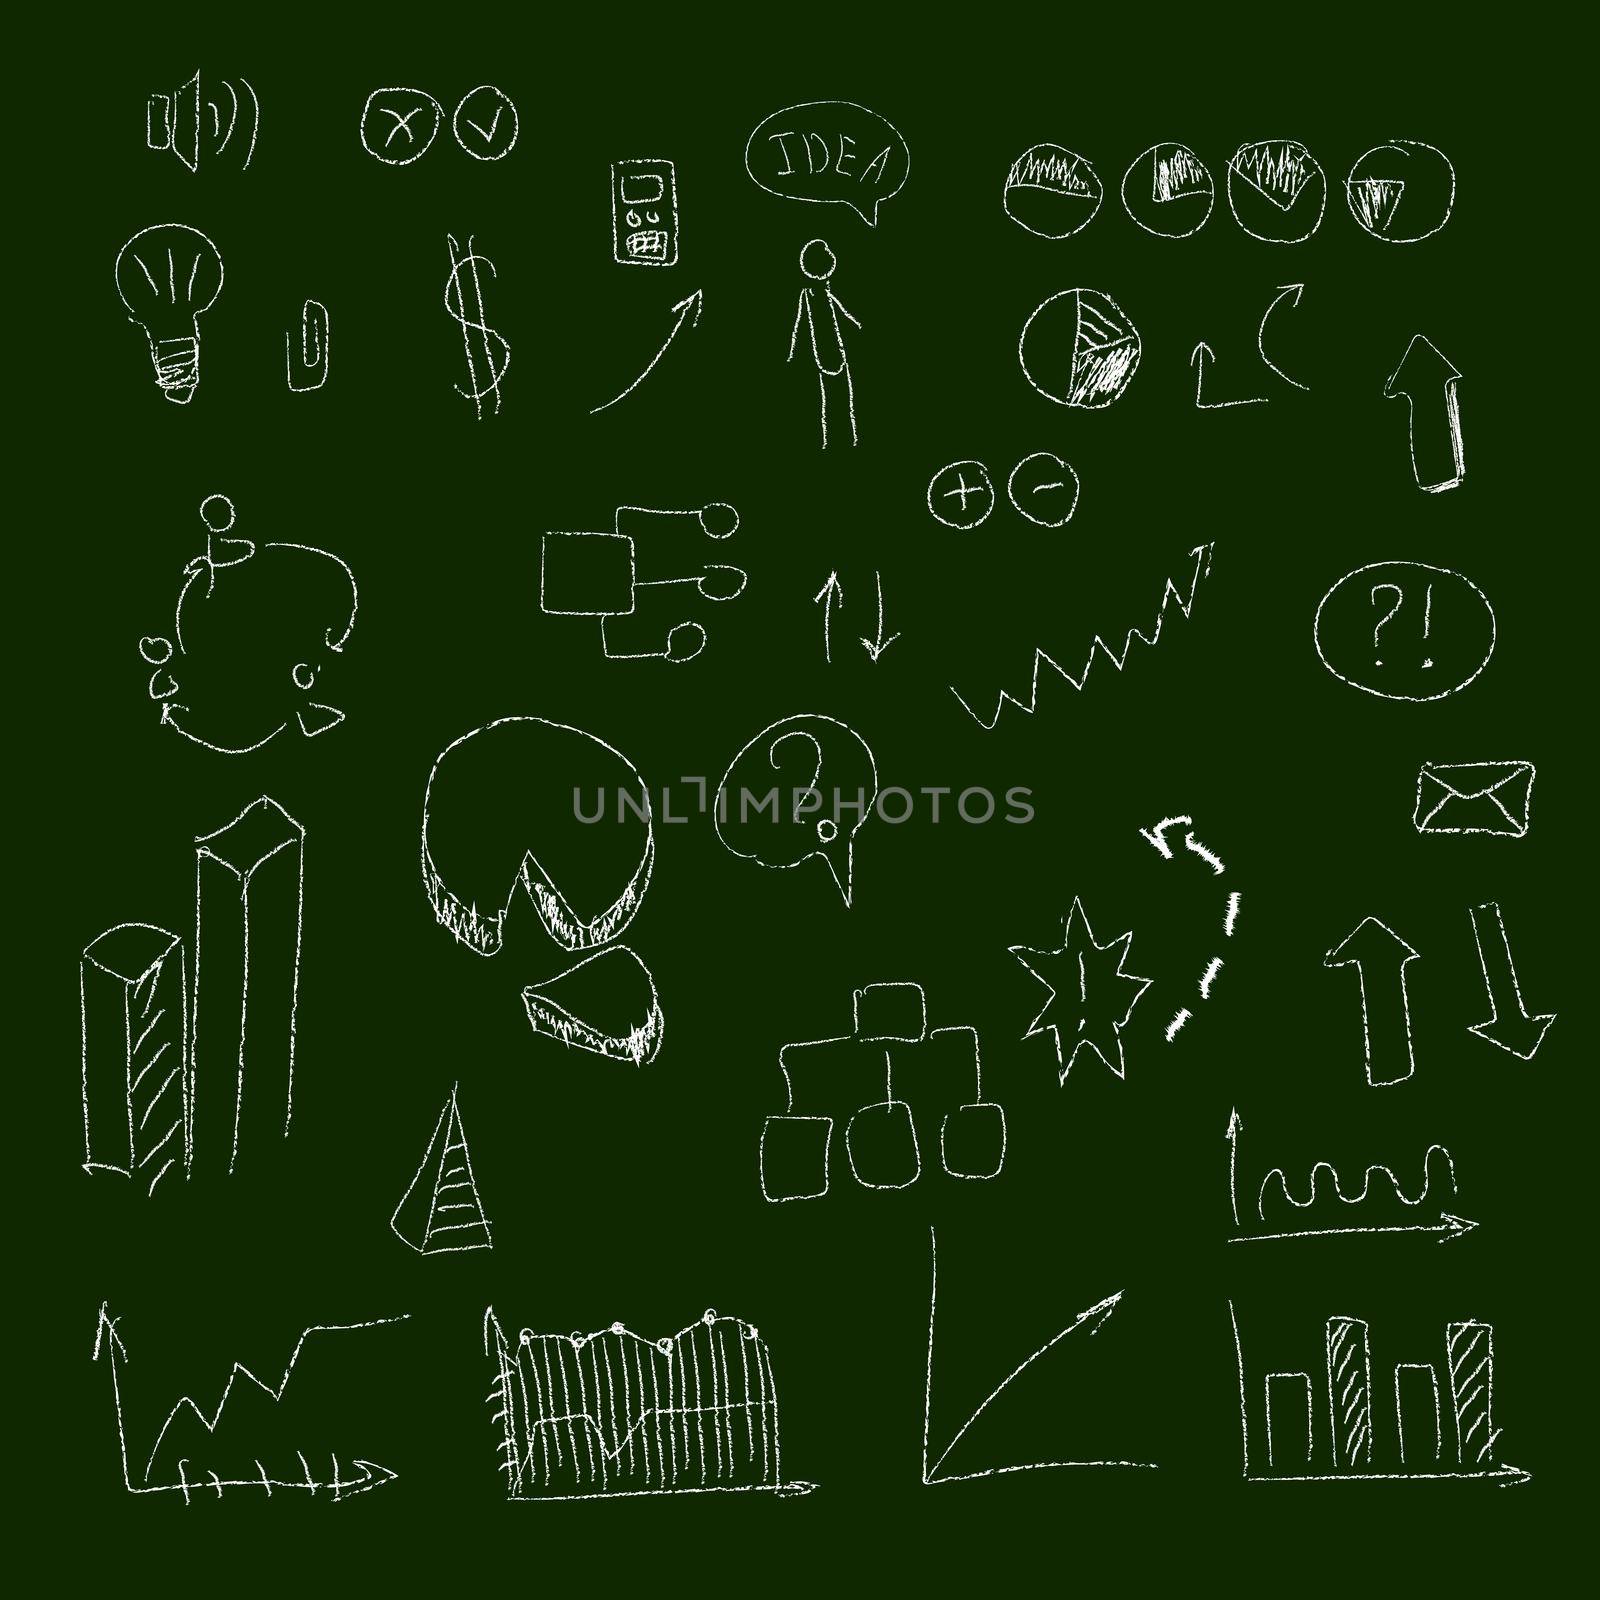 Set of hand drown icons, on chalkboard, for creating business concepts and illustrating ideas, Illustration